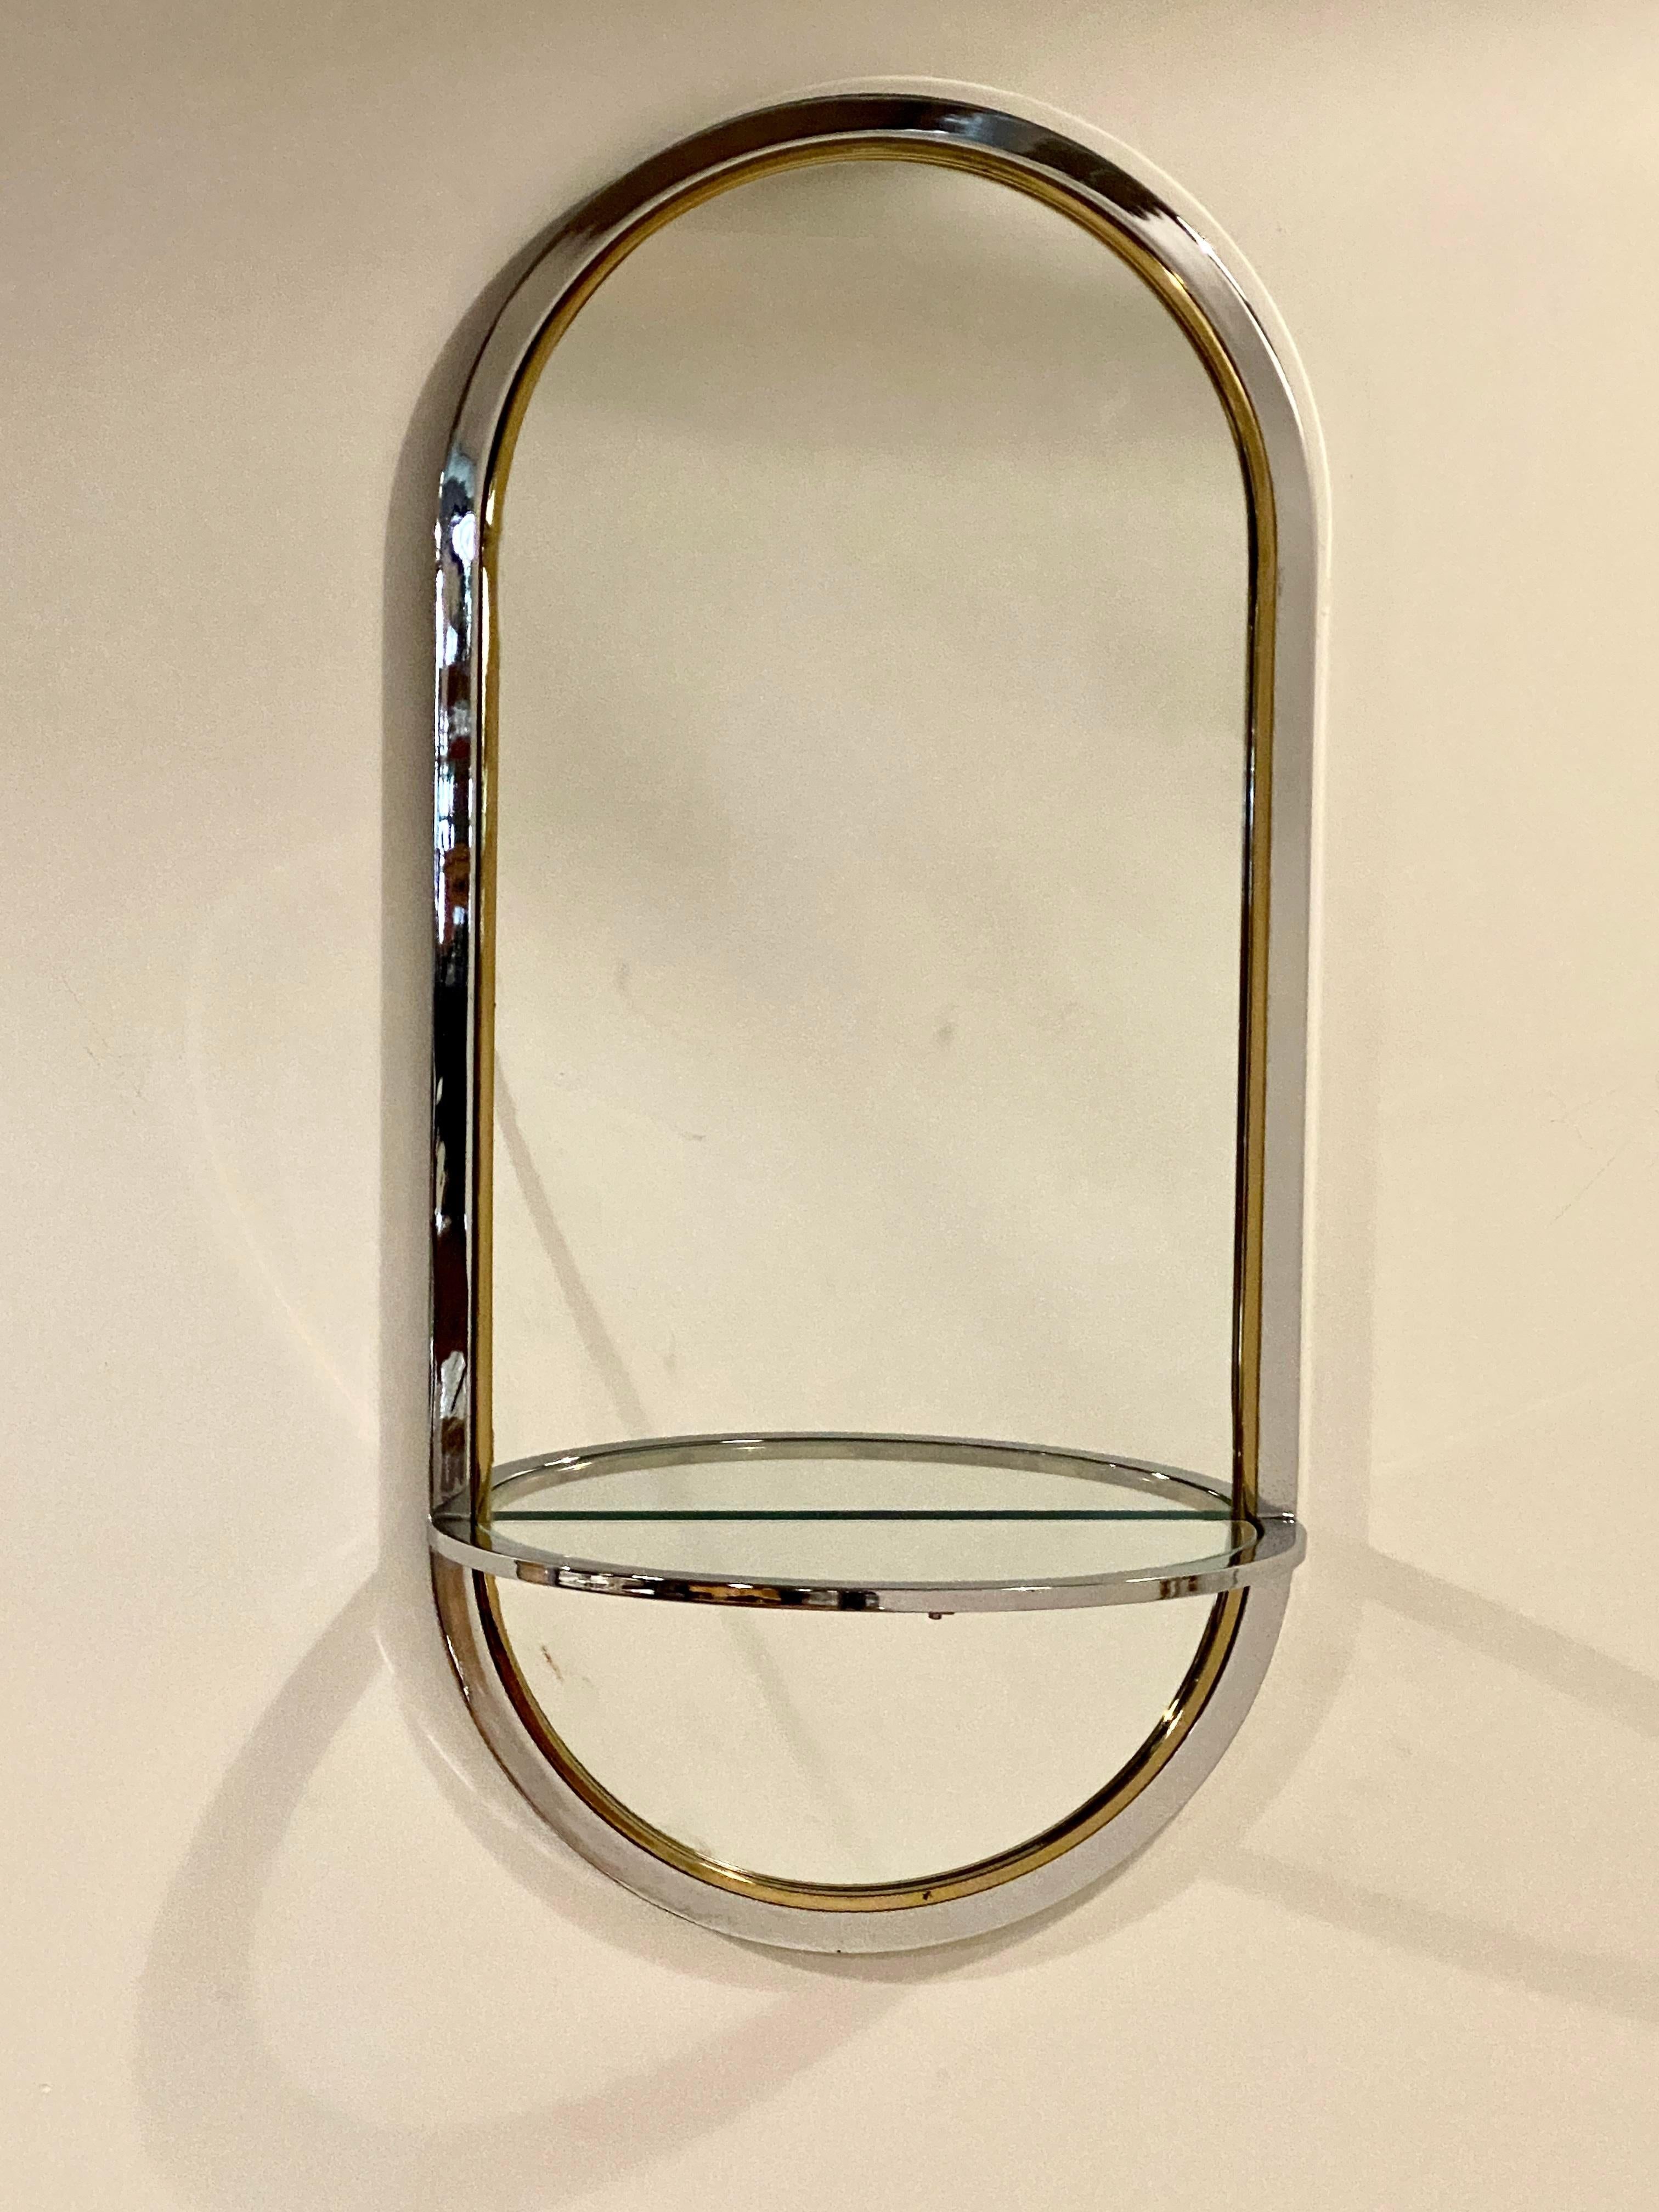 Leon Rosen Racetrack Wall Mirror for Pace, 1970's In Good Condition For Sale In Chicago, IL